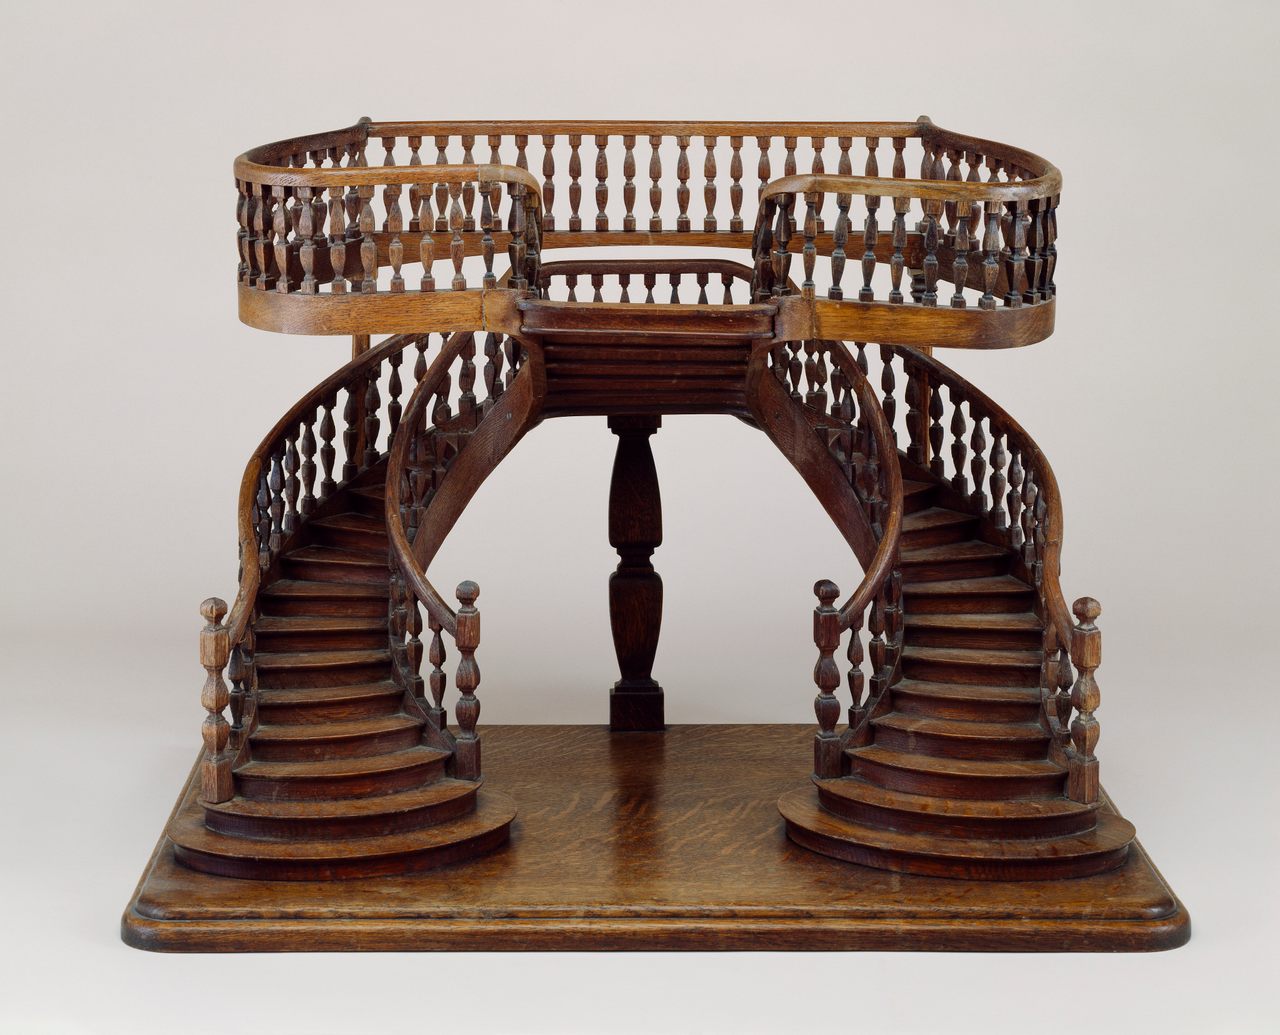  Staircase Model (France), mid–late 19th century; carved, joined, turned, bent, and planed oak; H x W x D: 52 x 71 x 44 cm (20 1/2 x 27 15/16 x 17 5/16 in.); Gift of Eugene V. and Clare E. Thaw; 2007-45-10